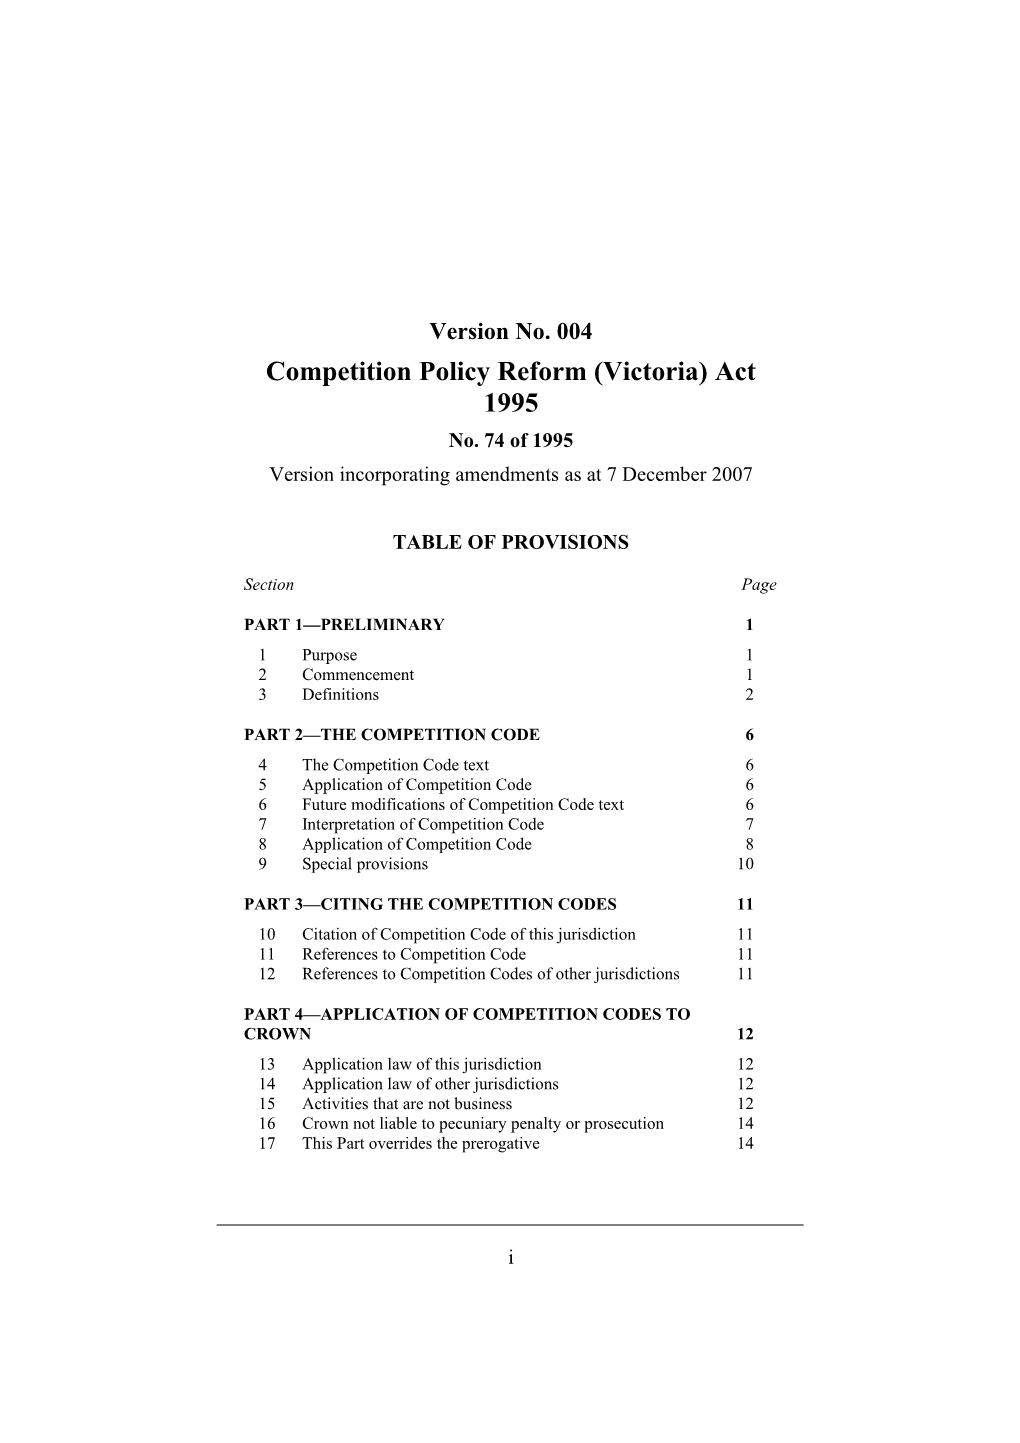 Competition Policy Reform (Victoria) Act 1995